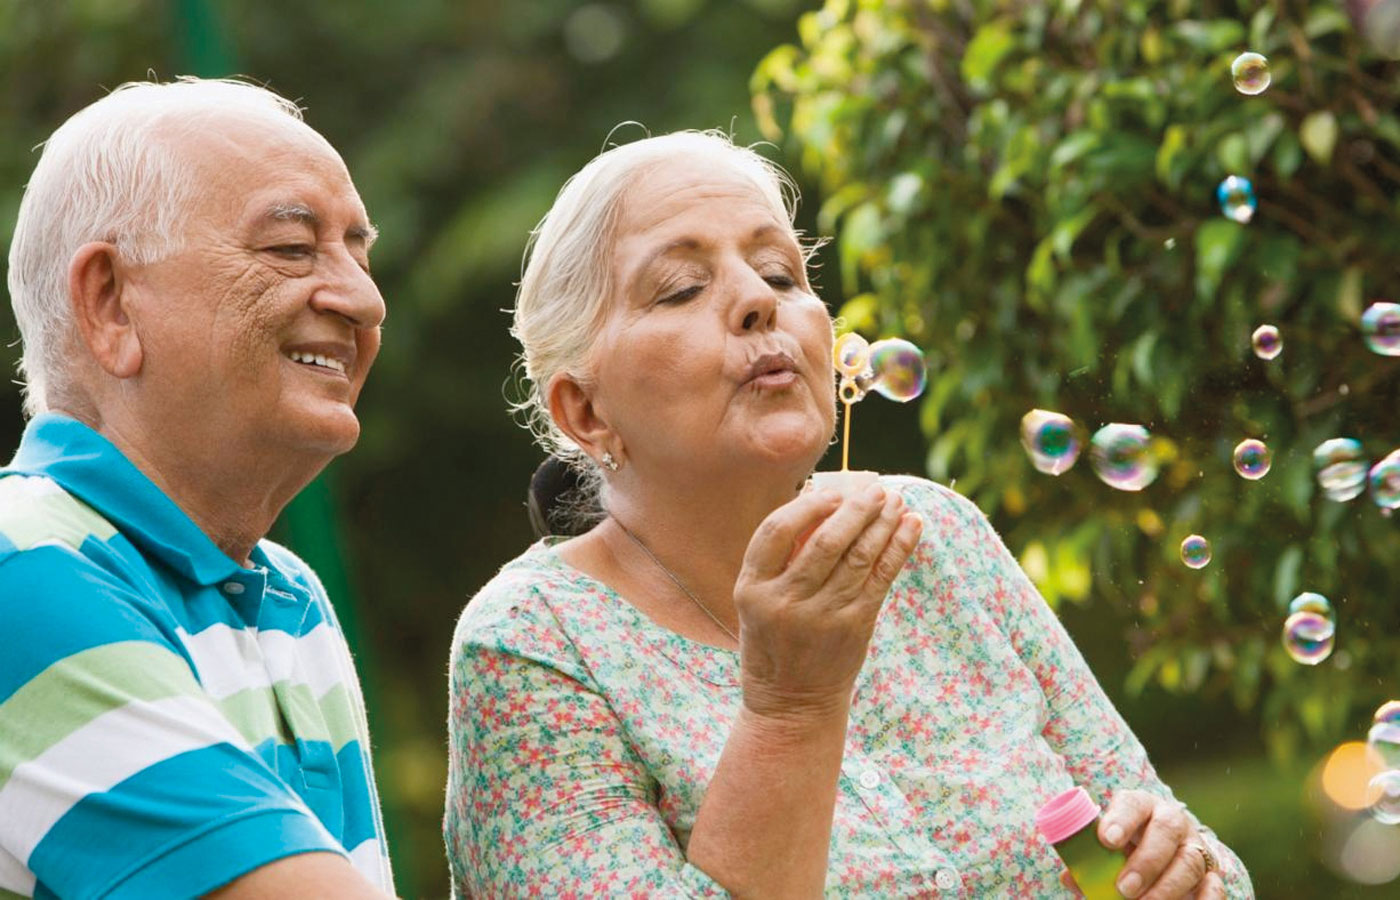 things adults can do for senior citizens